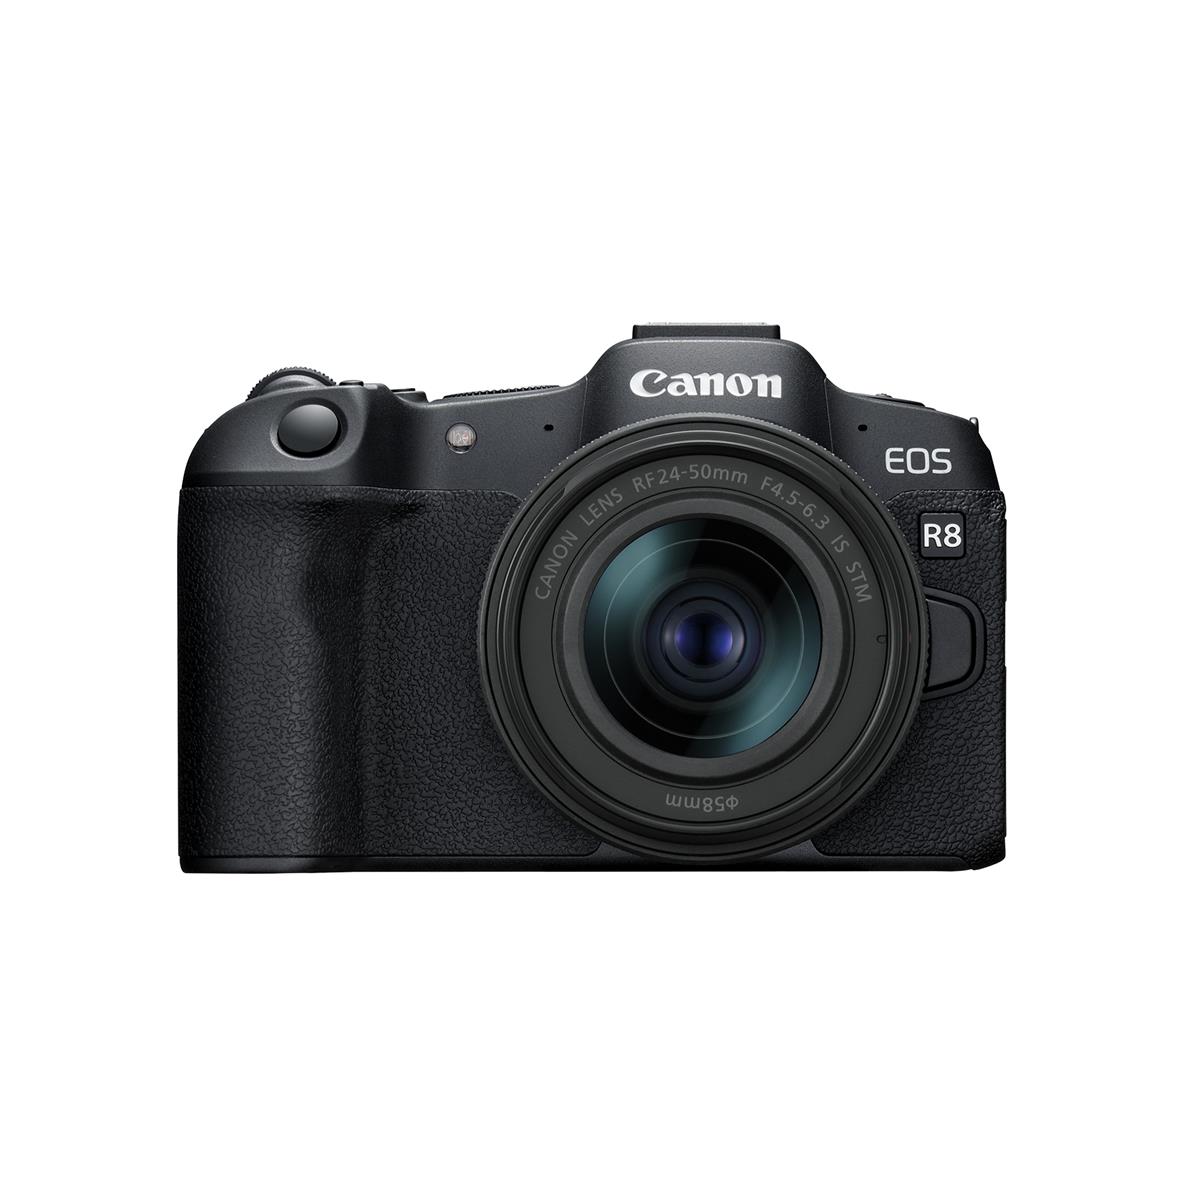 Image of Canon EOS R8 Mirrorless Camera with RF 24-50mm f/4.5-6.3 IS STM Lens